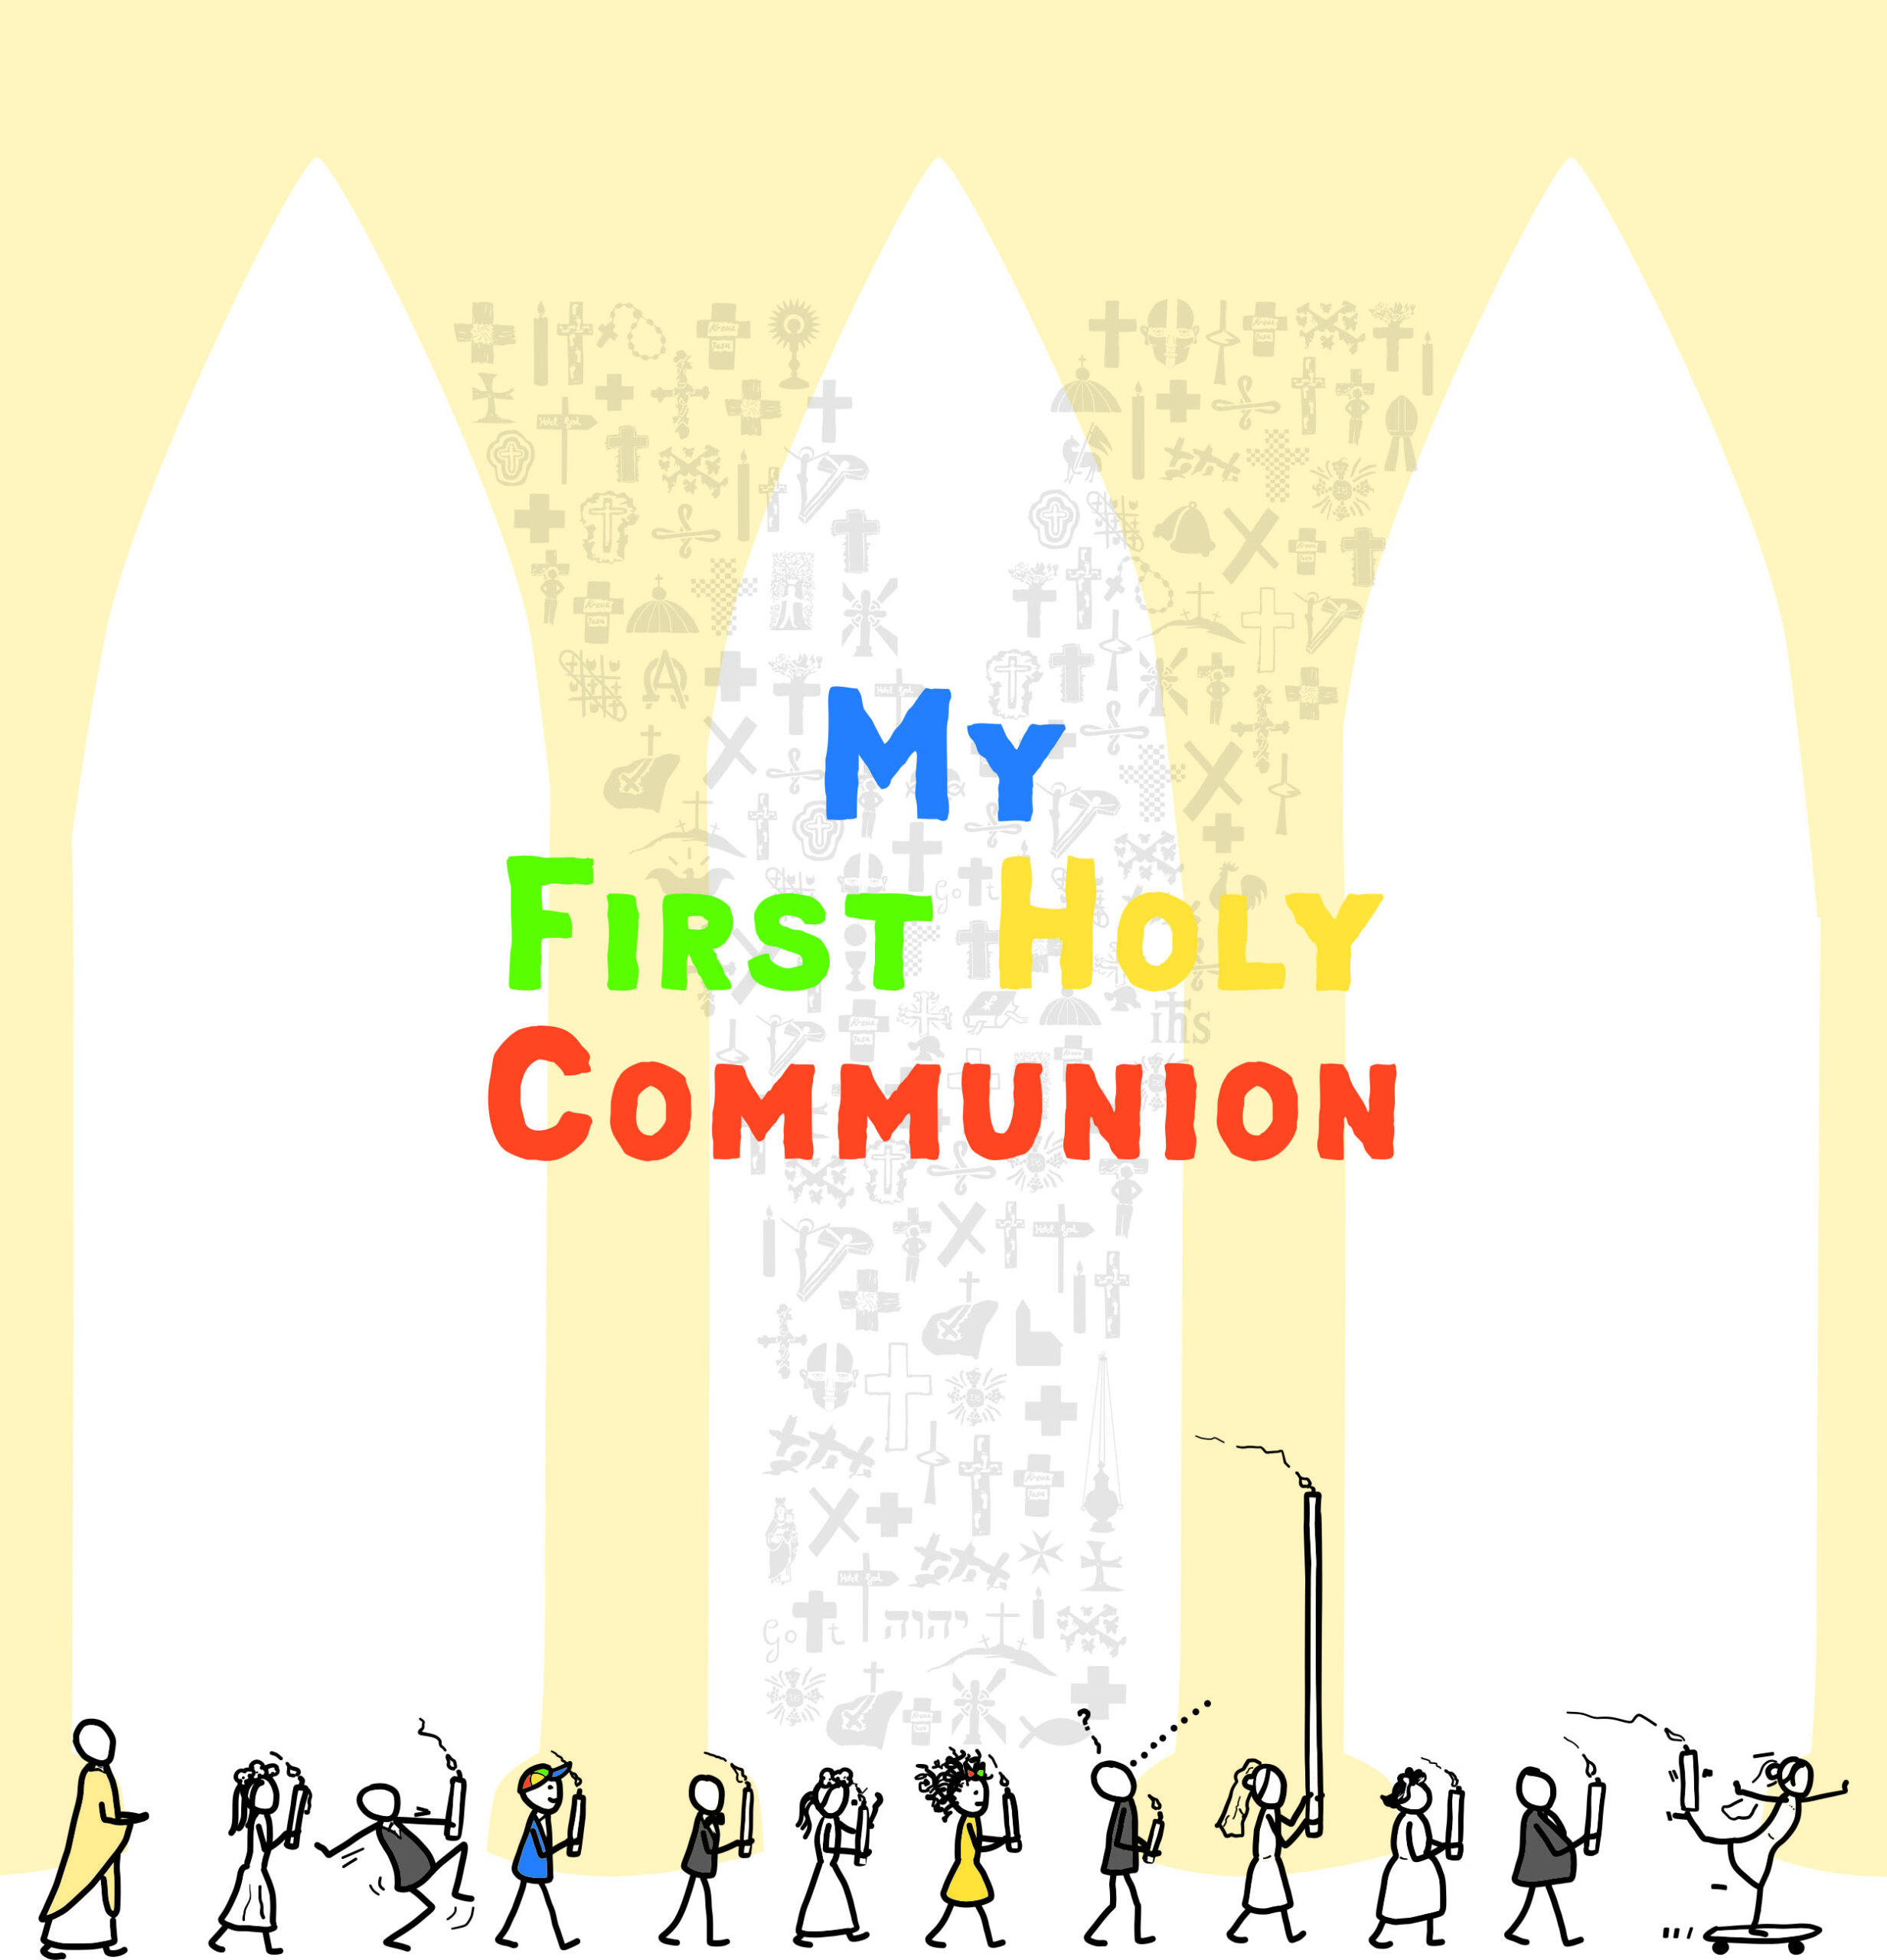 My first holy communion